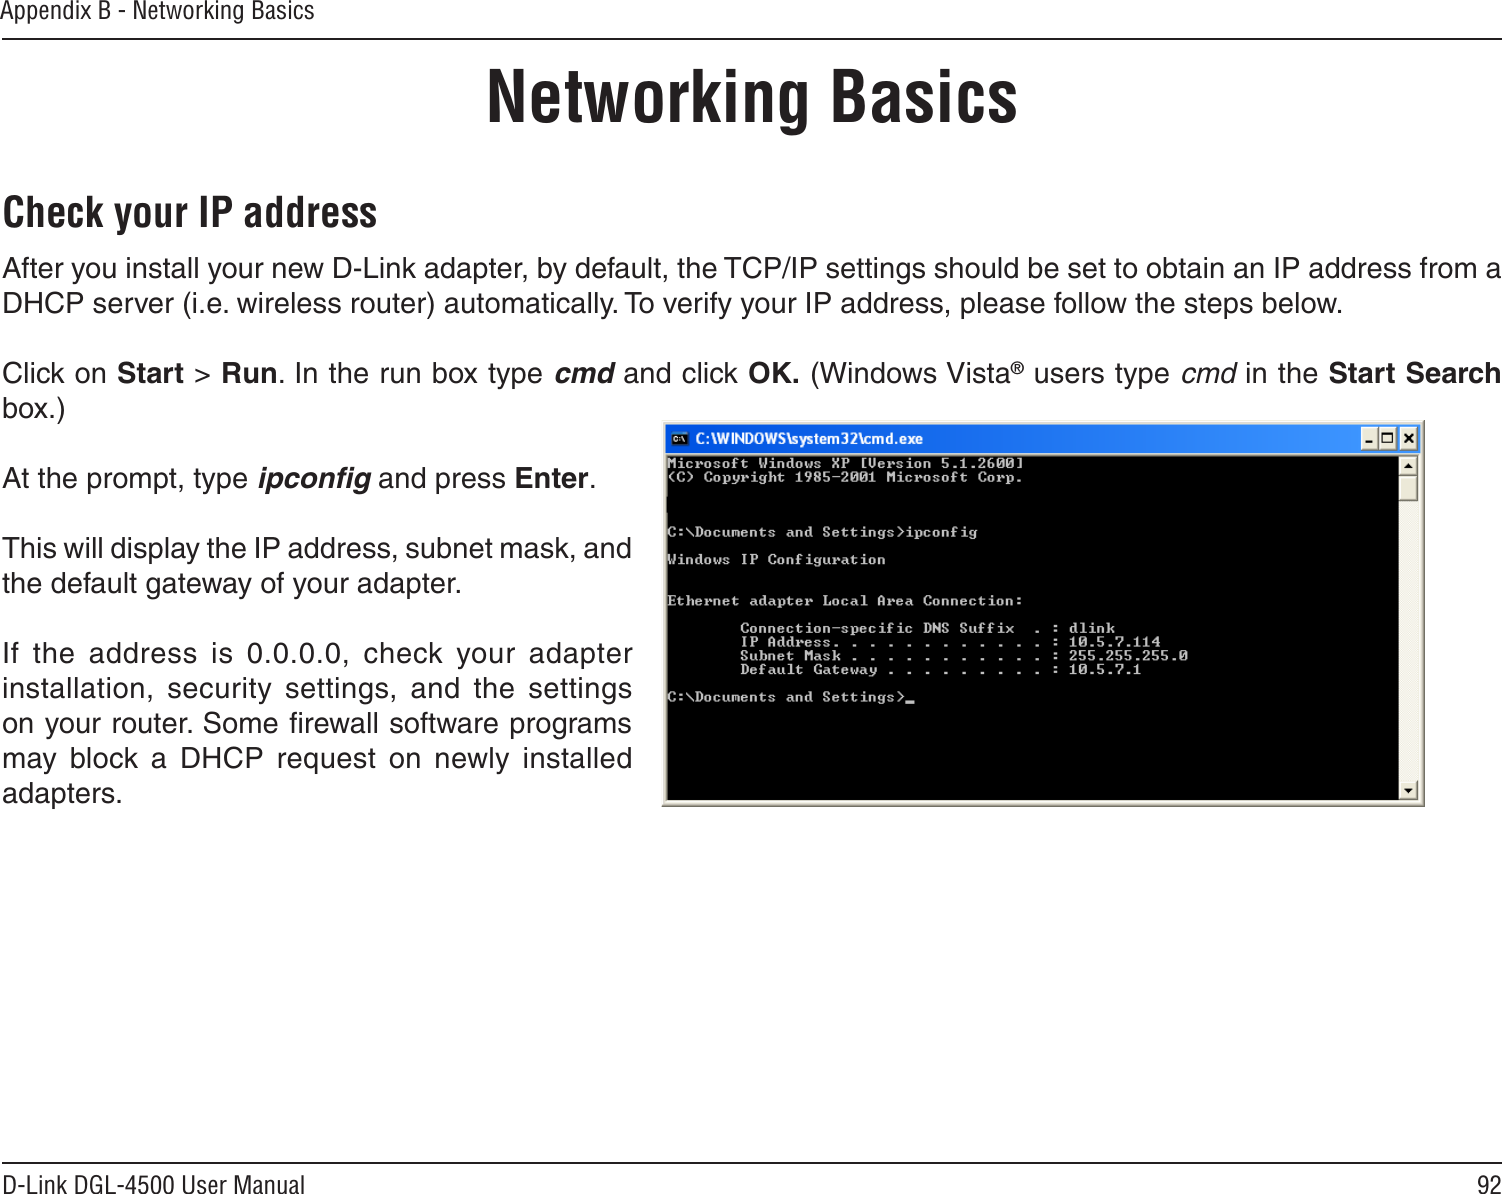 92D-Link DGL-4500 User ManualAppendix B - Networking BasicsNetworking BasicsCheck your IP addressAfter you install your new D-Link adapter, by default, the TCP/IP settings should be set to obtain an IP address from a DHCP server (i.e. wireless router) automatically. To verify your IP address, please follow the steps below.Click on Start &gt; Run. In the run box type cmd and click OK. (Windows Vista® users type cmd in the Start Search box.)At the prompt, type ipconﬁg and press Enter.This will display the IP address, subnet mask, and the default gateway of your adapter.If  the  address  is  0.0.0.0,  check  your  adapter installation,  security  settings,  and  the  settings on your router. Some ﬁrewall software programs may  block  a  DHCP  request  on  newly  installed adapters. 